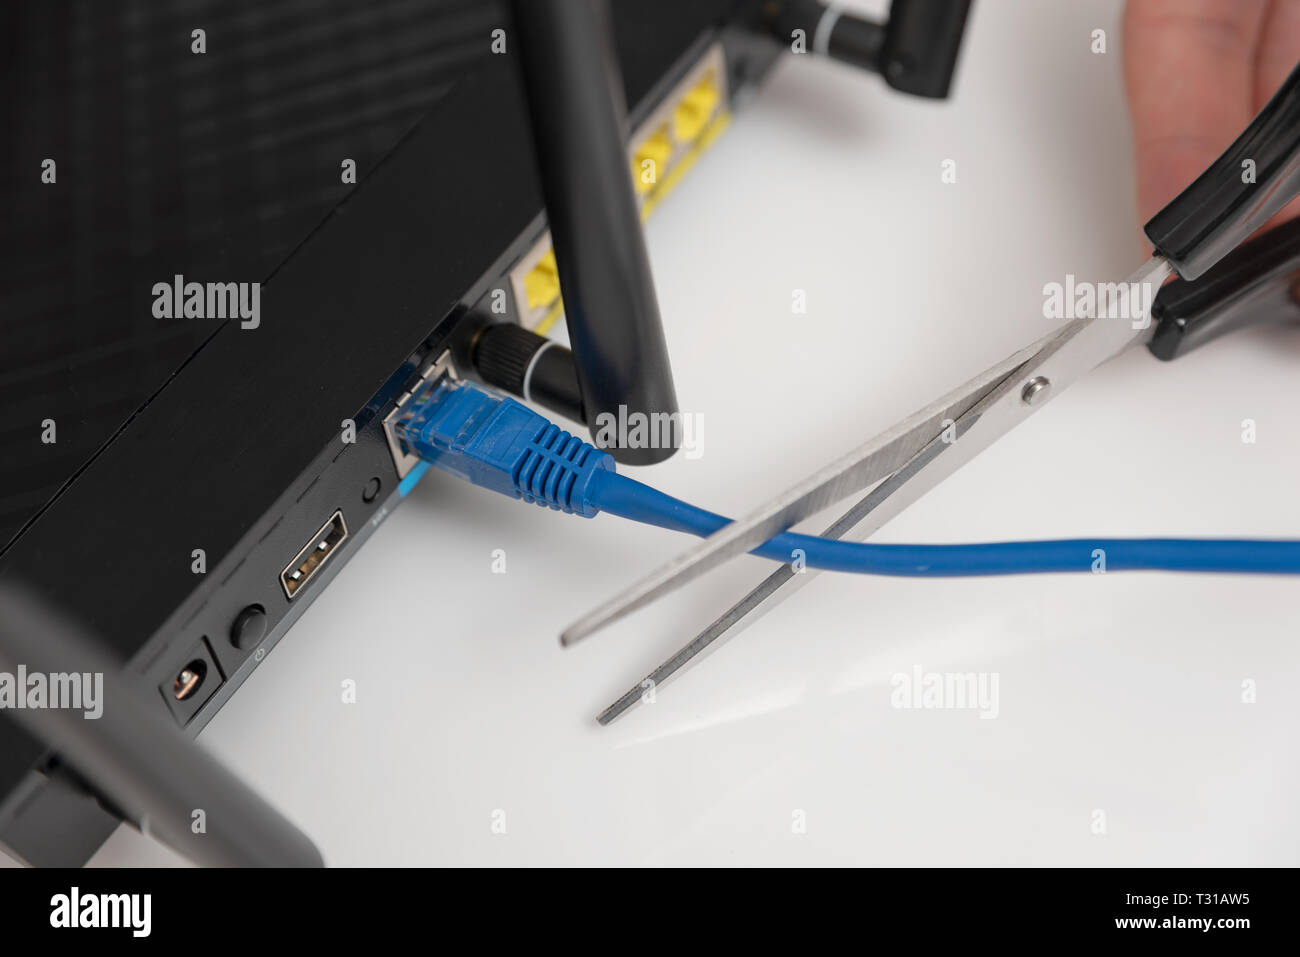 Network and data protection concept with scissors. Internet router or switch with cable plugged in. Stock Photo